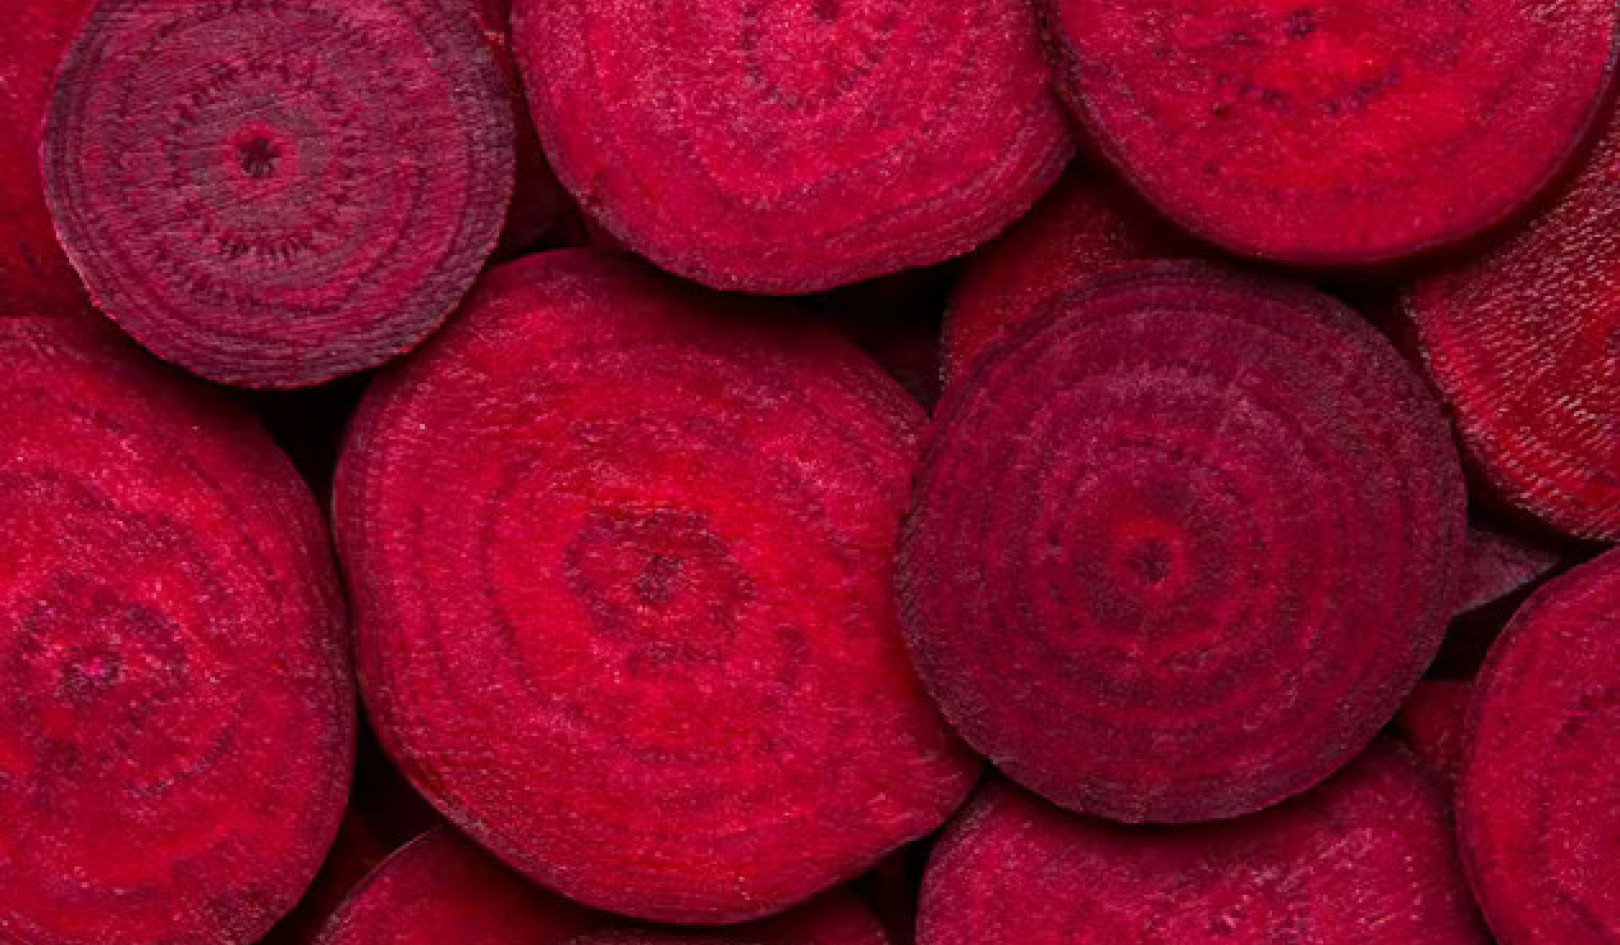 How Beetroot Can Boost Your Health and Maybe Your Love Life